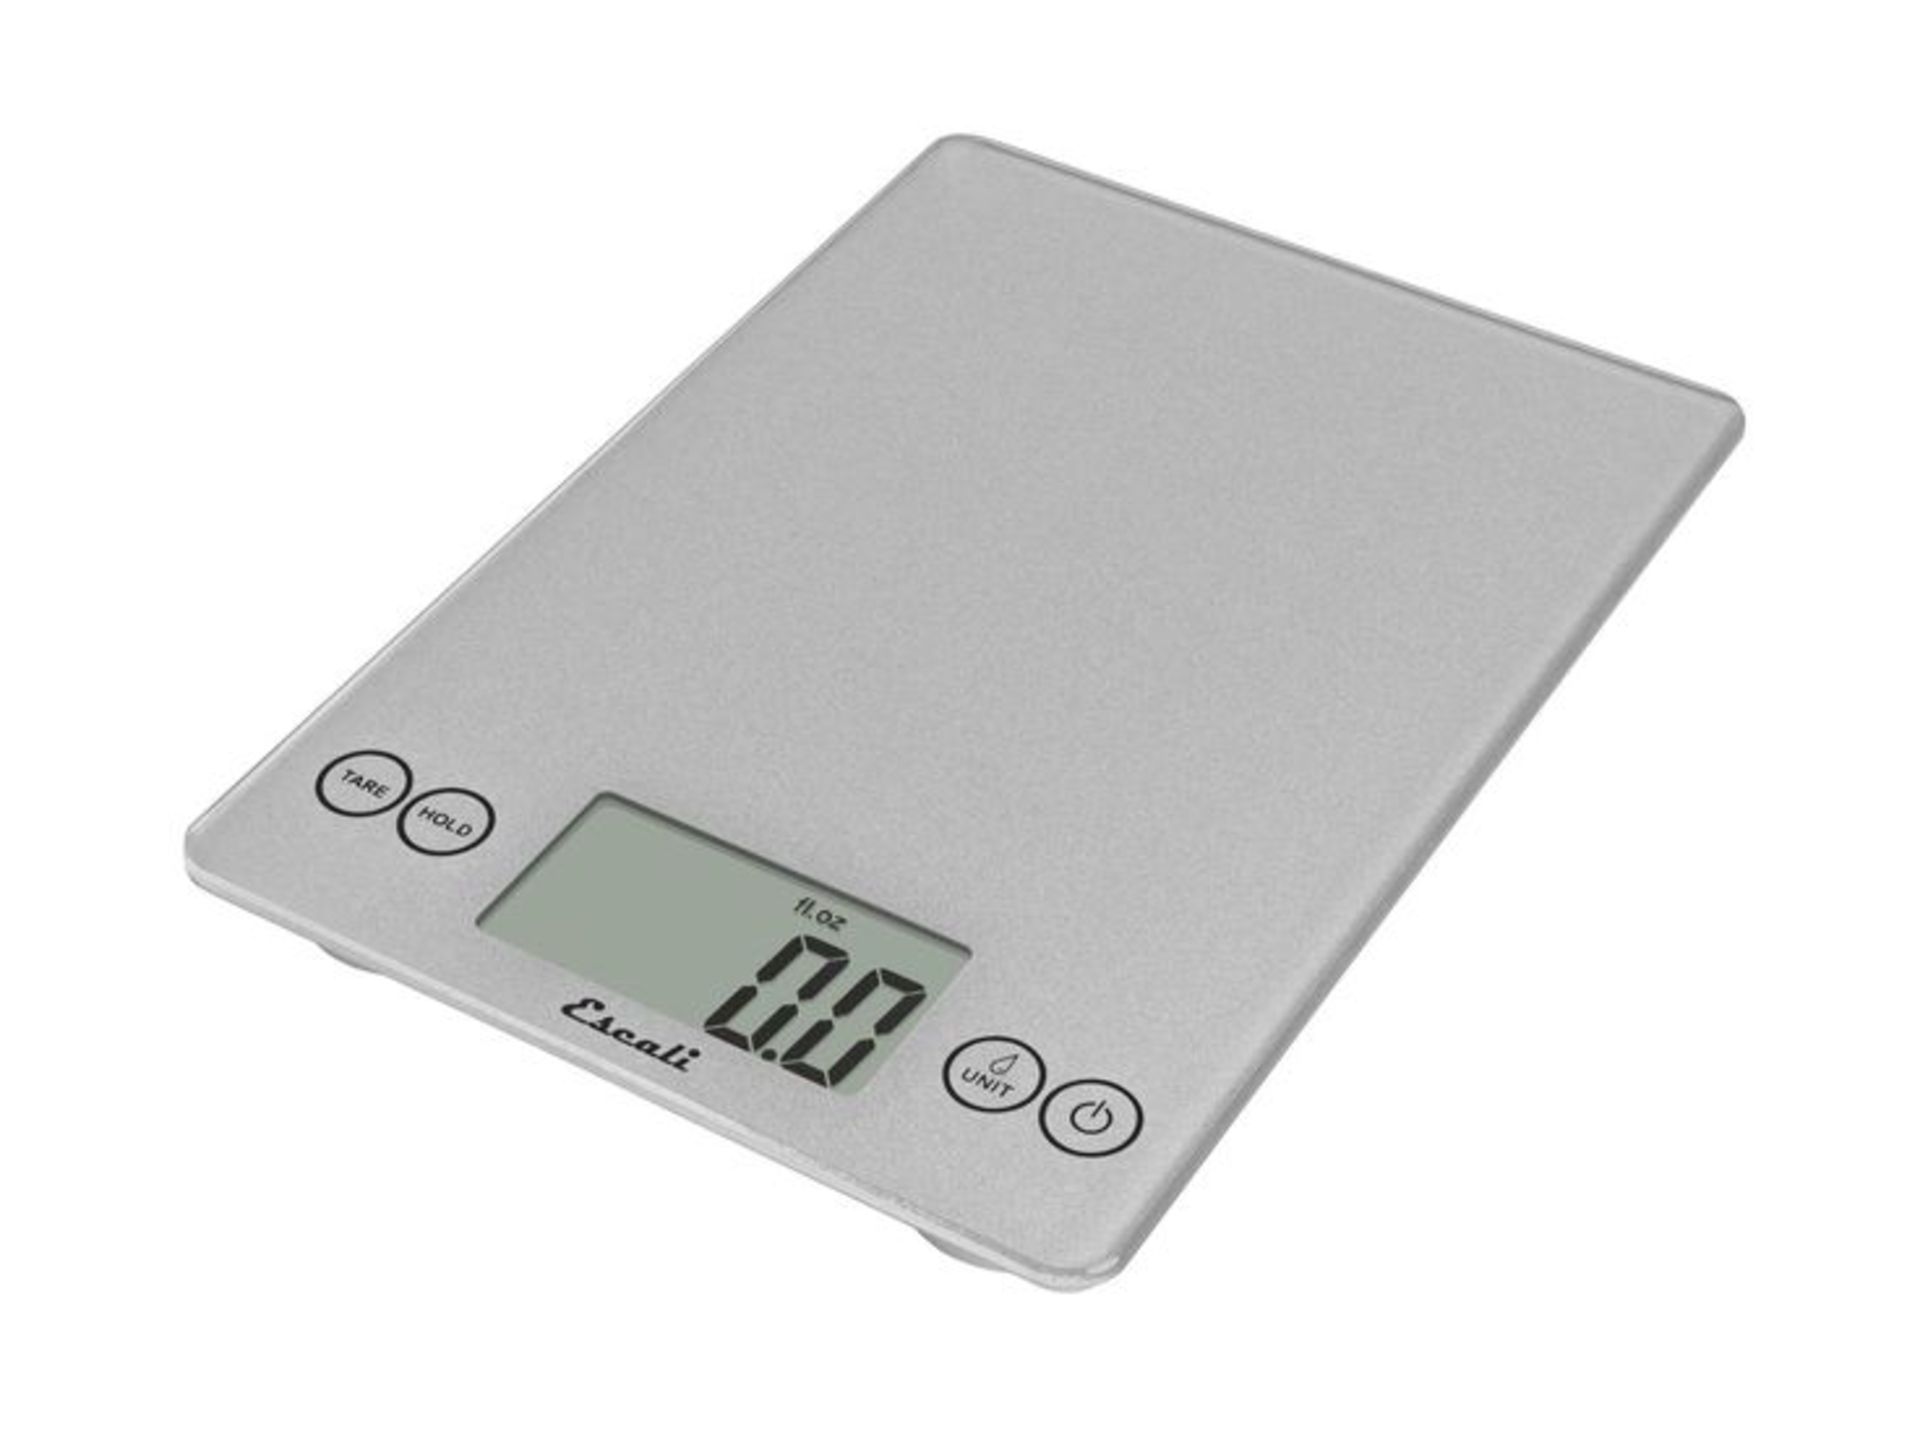 V Brand New Digital Kitchen Scales with Large LCD Display in lbs OZs and Grams (Styles may vary - Image 3 of 4